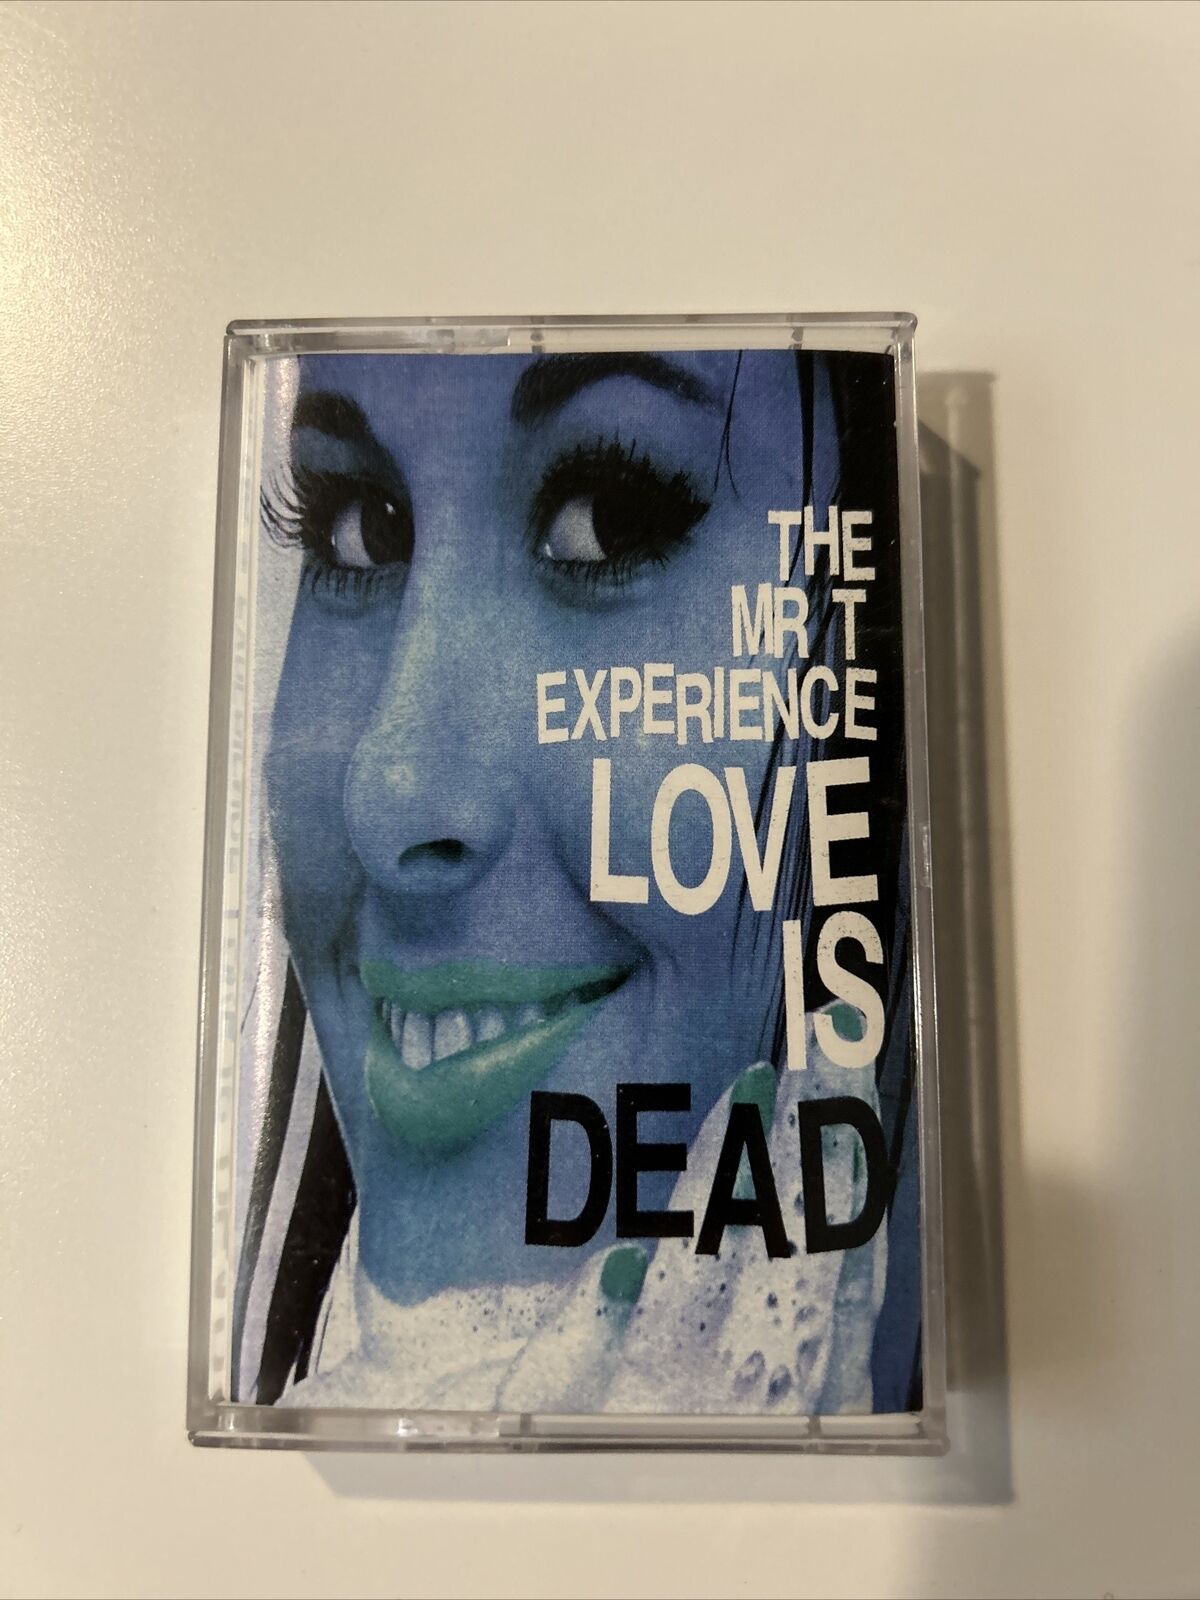 Cassette THE MR T EXPERIENCE Love Is Dead Lookout Records Punk